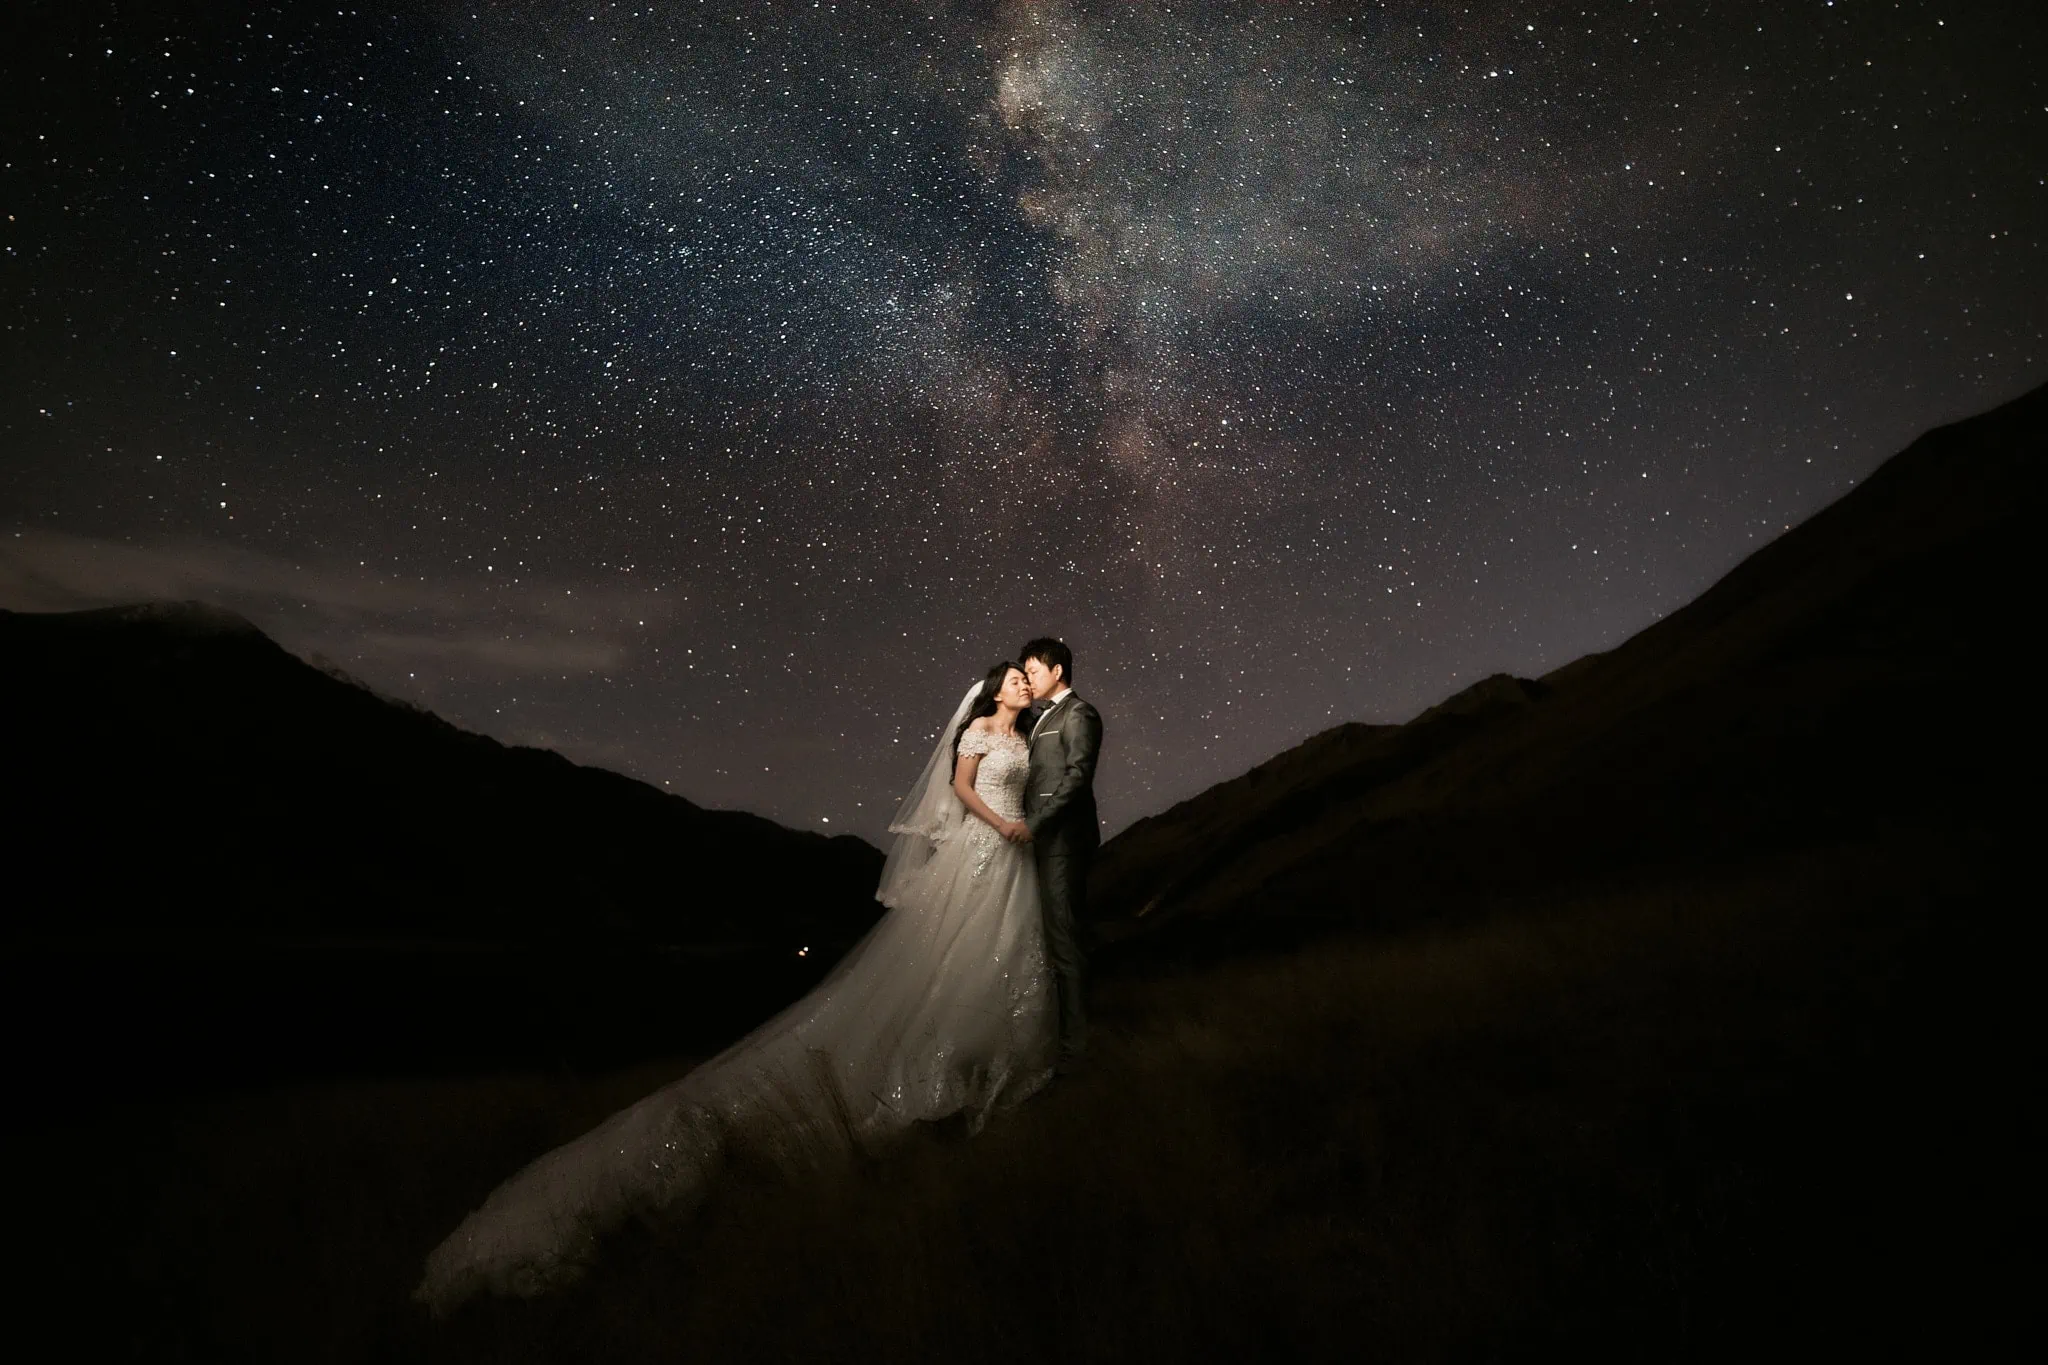 Queenstown New Zealand Elopement Wedding Photographer - A breathtaking Starry Night Shoot of a bride and groom standing under the milky way, showcased in our portfolio.